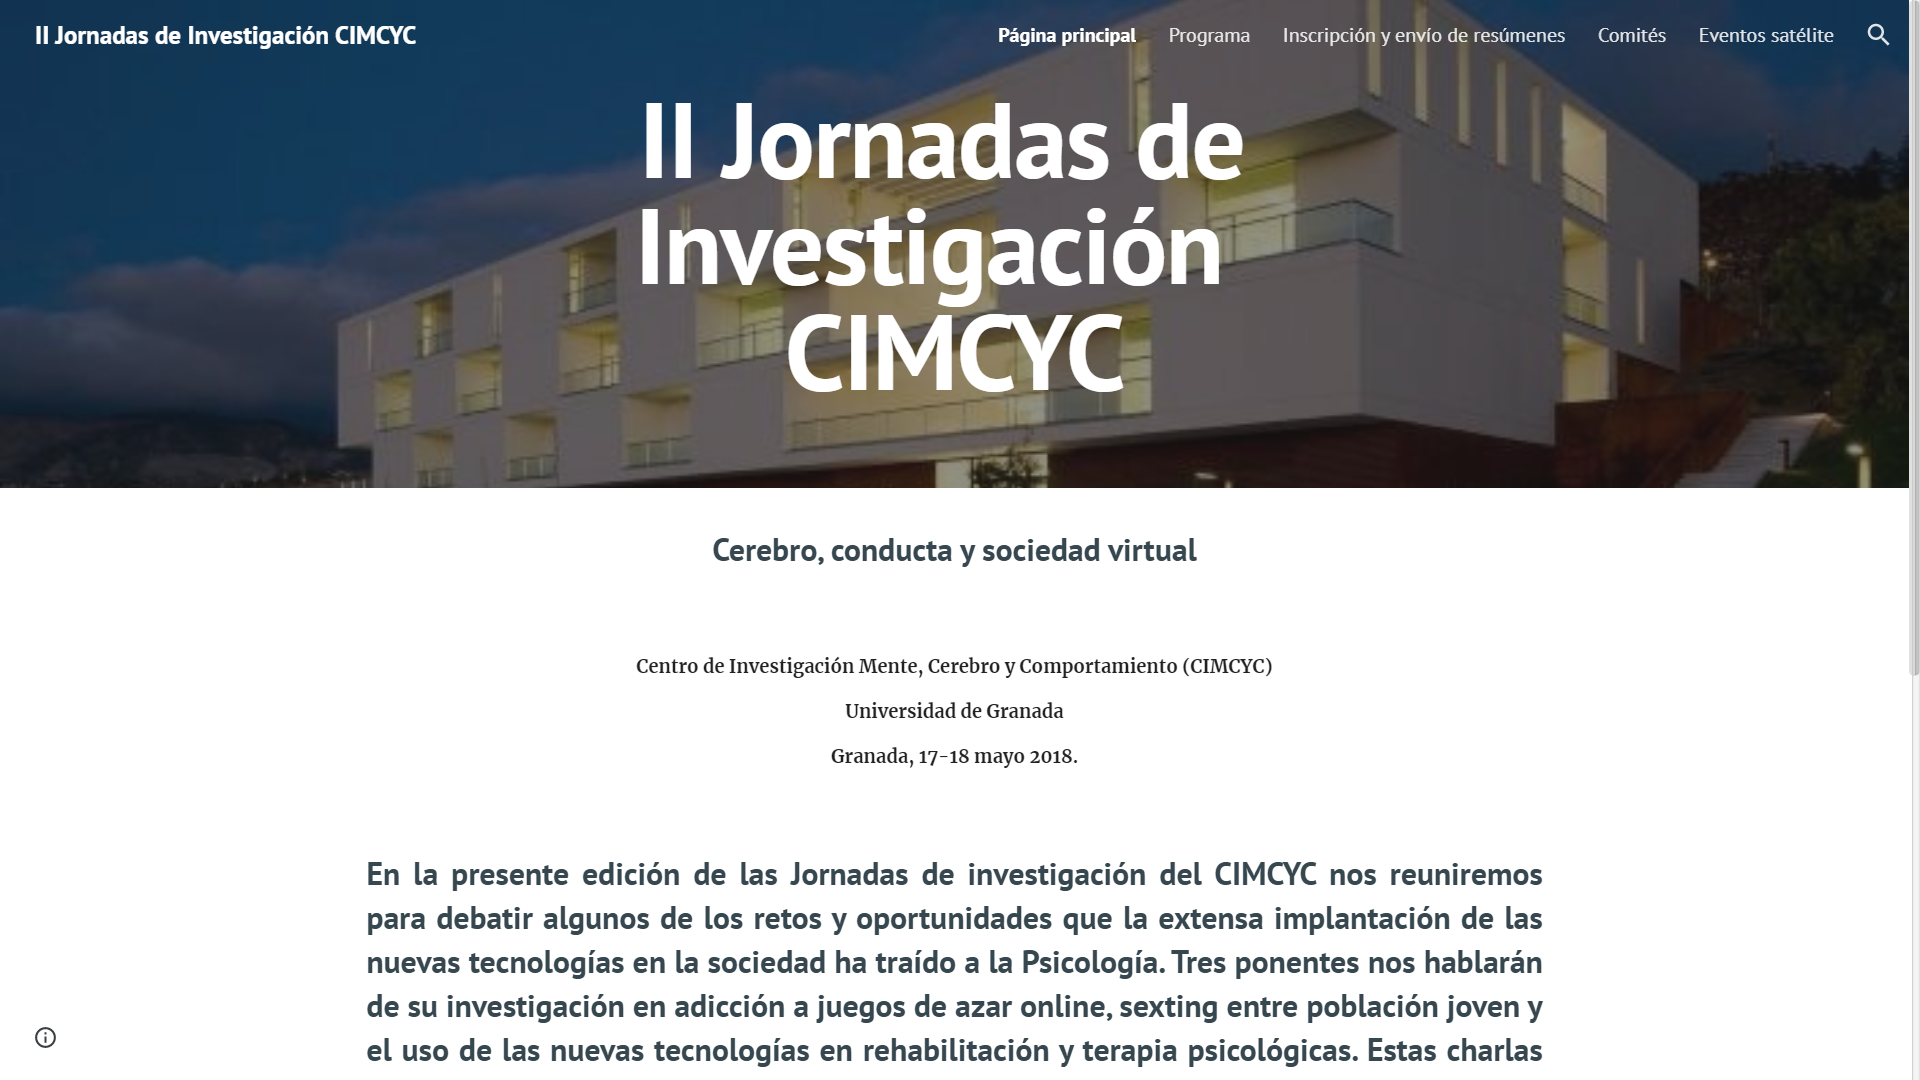 II Research Conference CIMCYC 2018